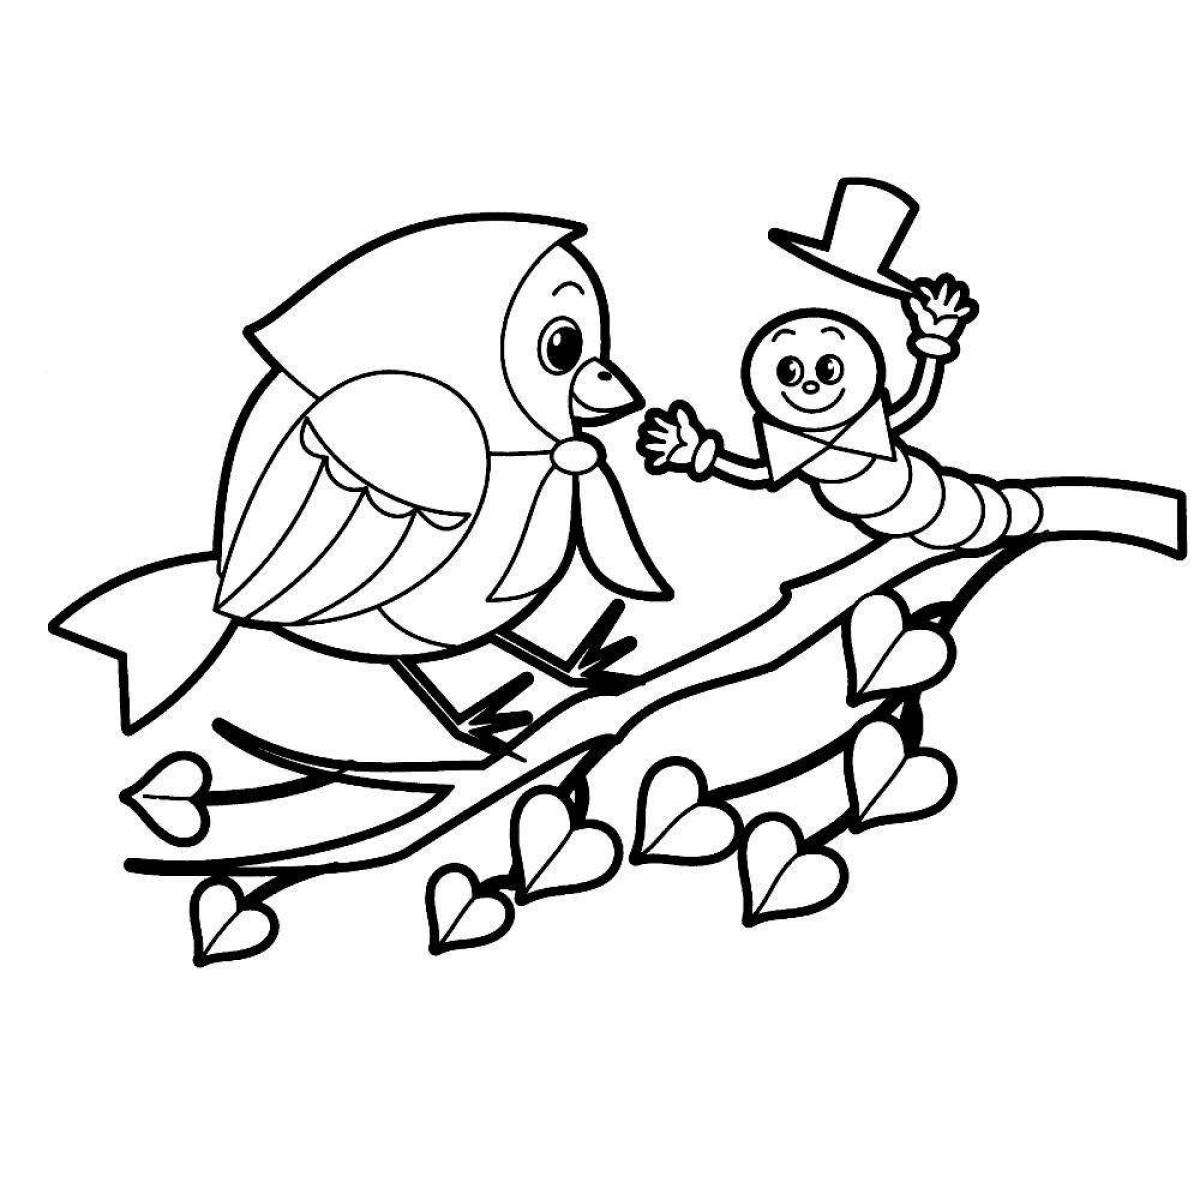 Adorable bird coloring page for 4-5 year olds